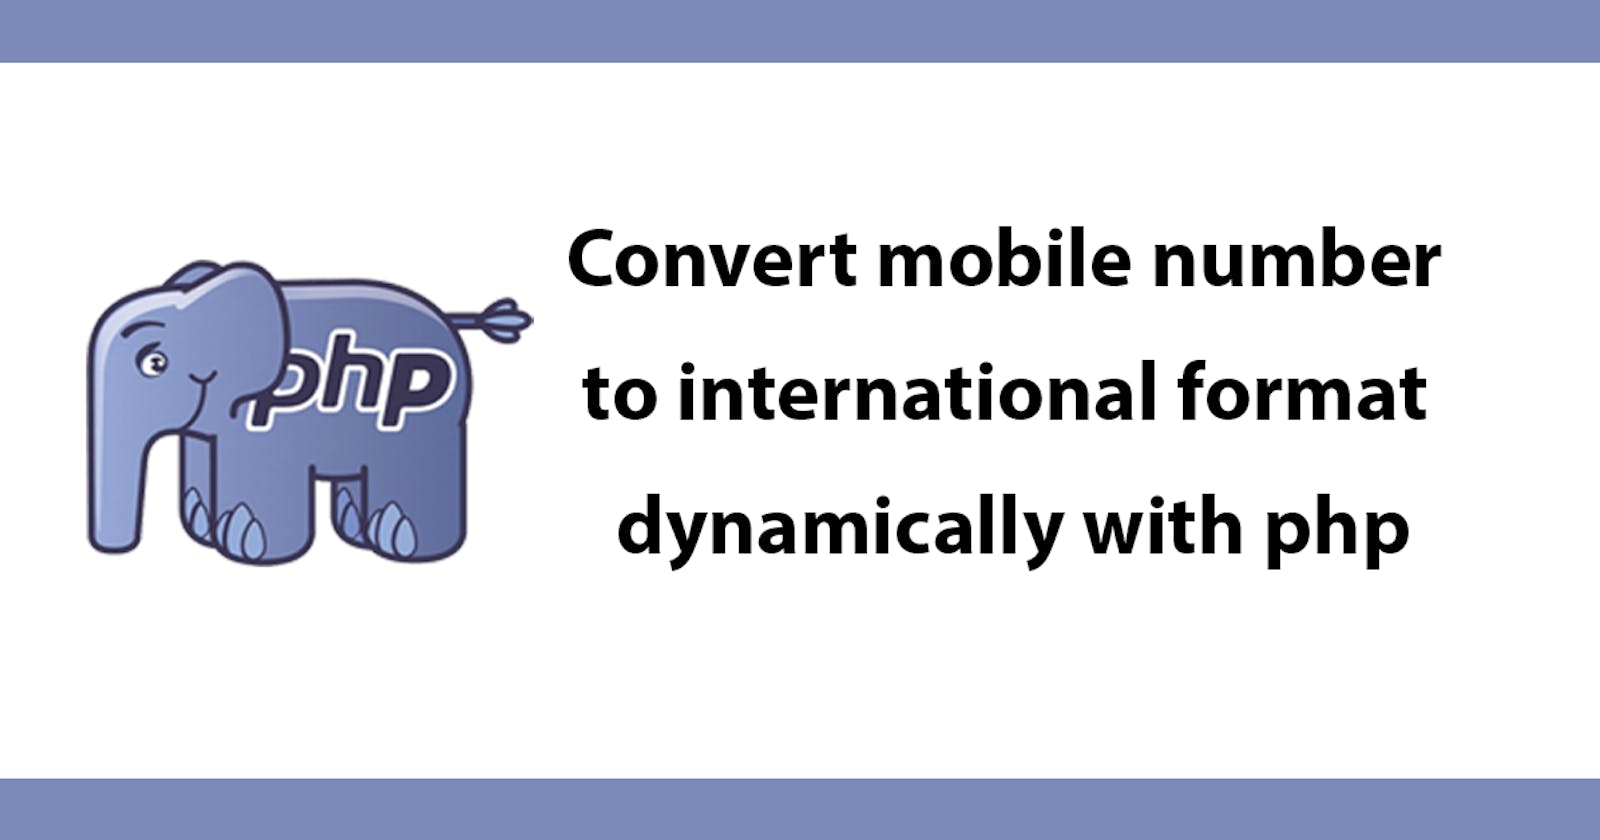 Convert mobile number to international format dynamically with php